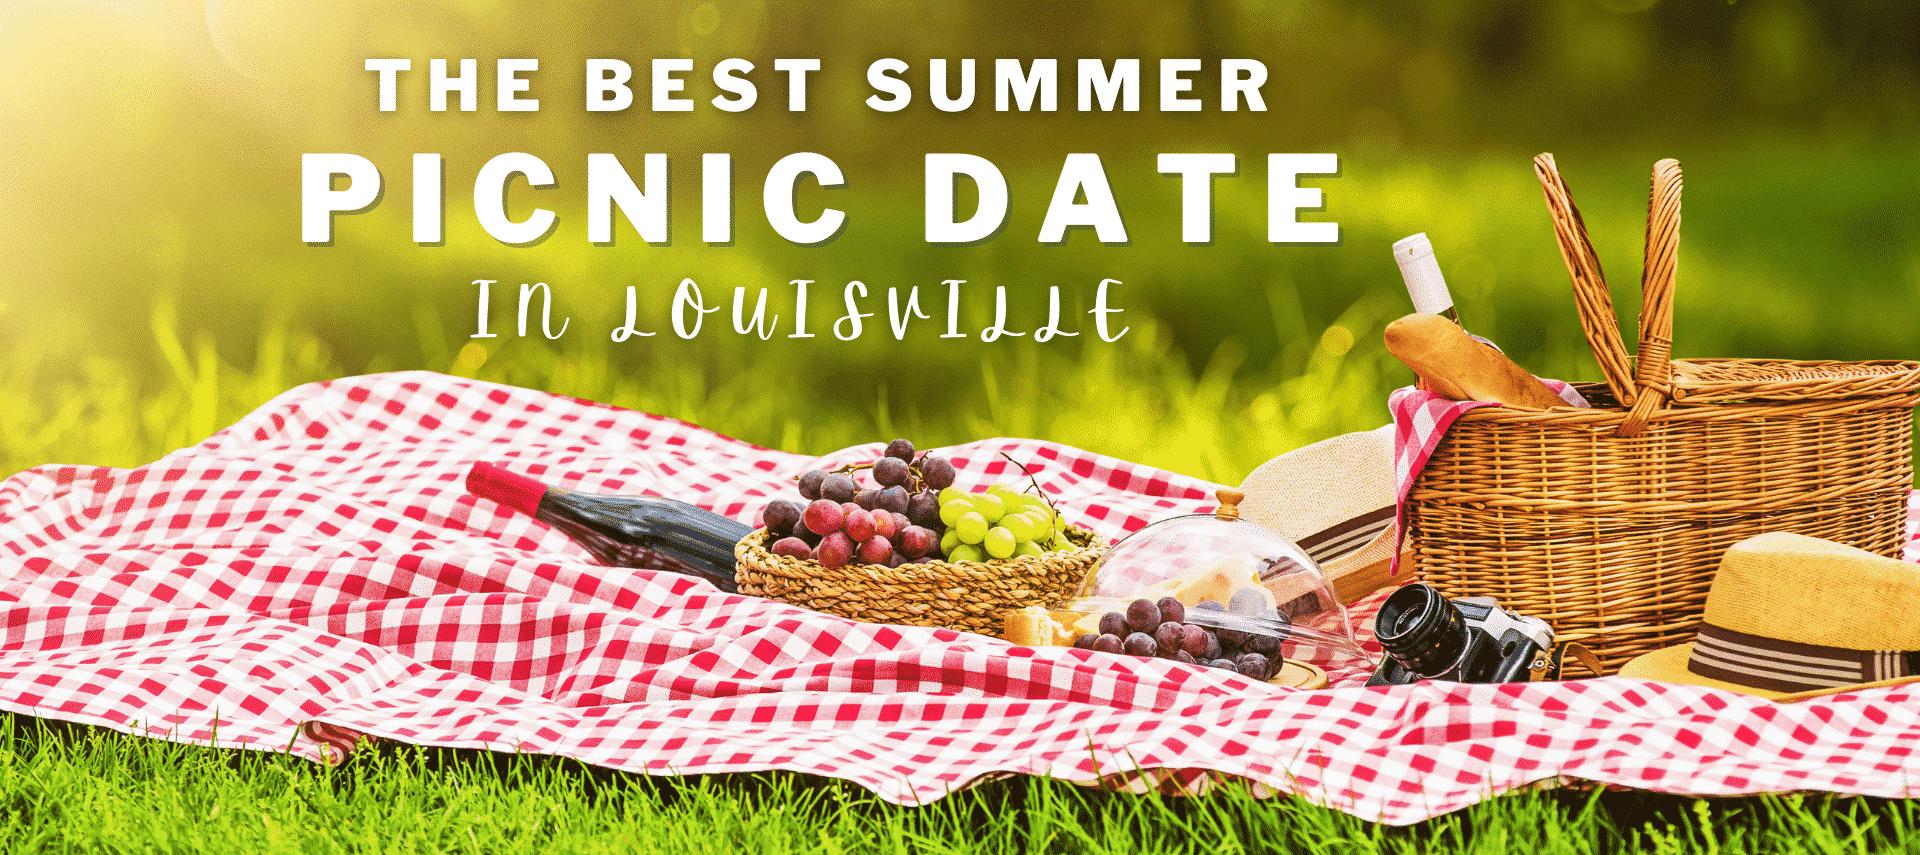 Switch it up this summer break! Picnics for your kiddo have never